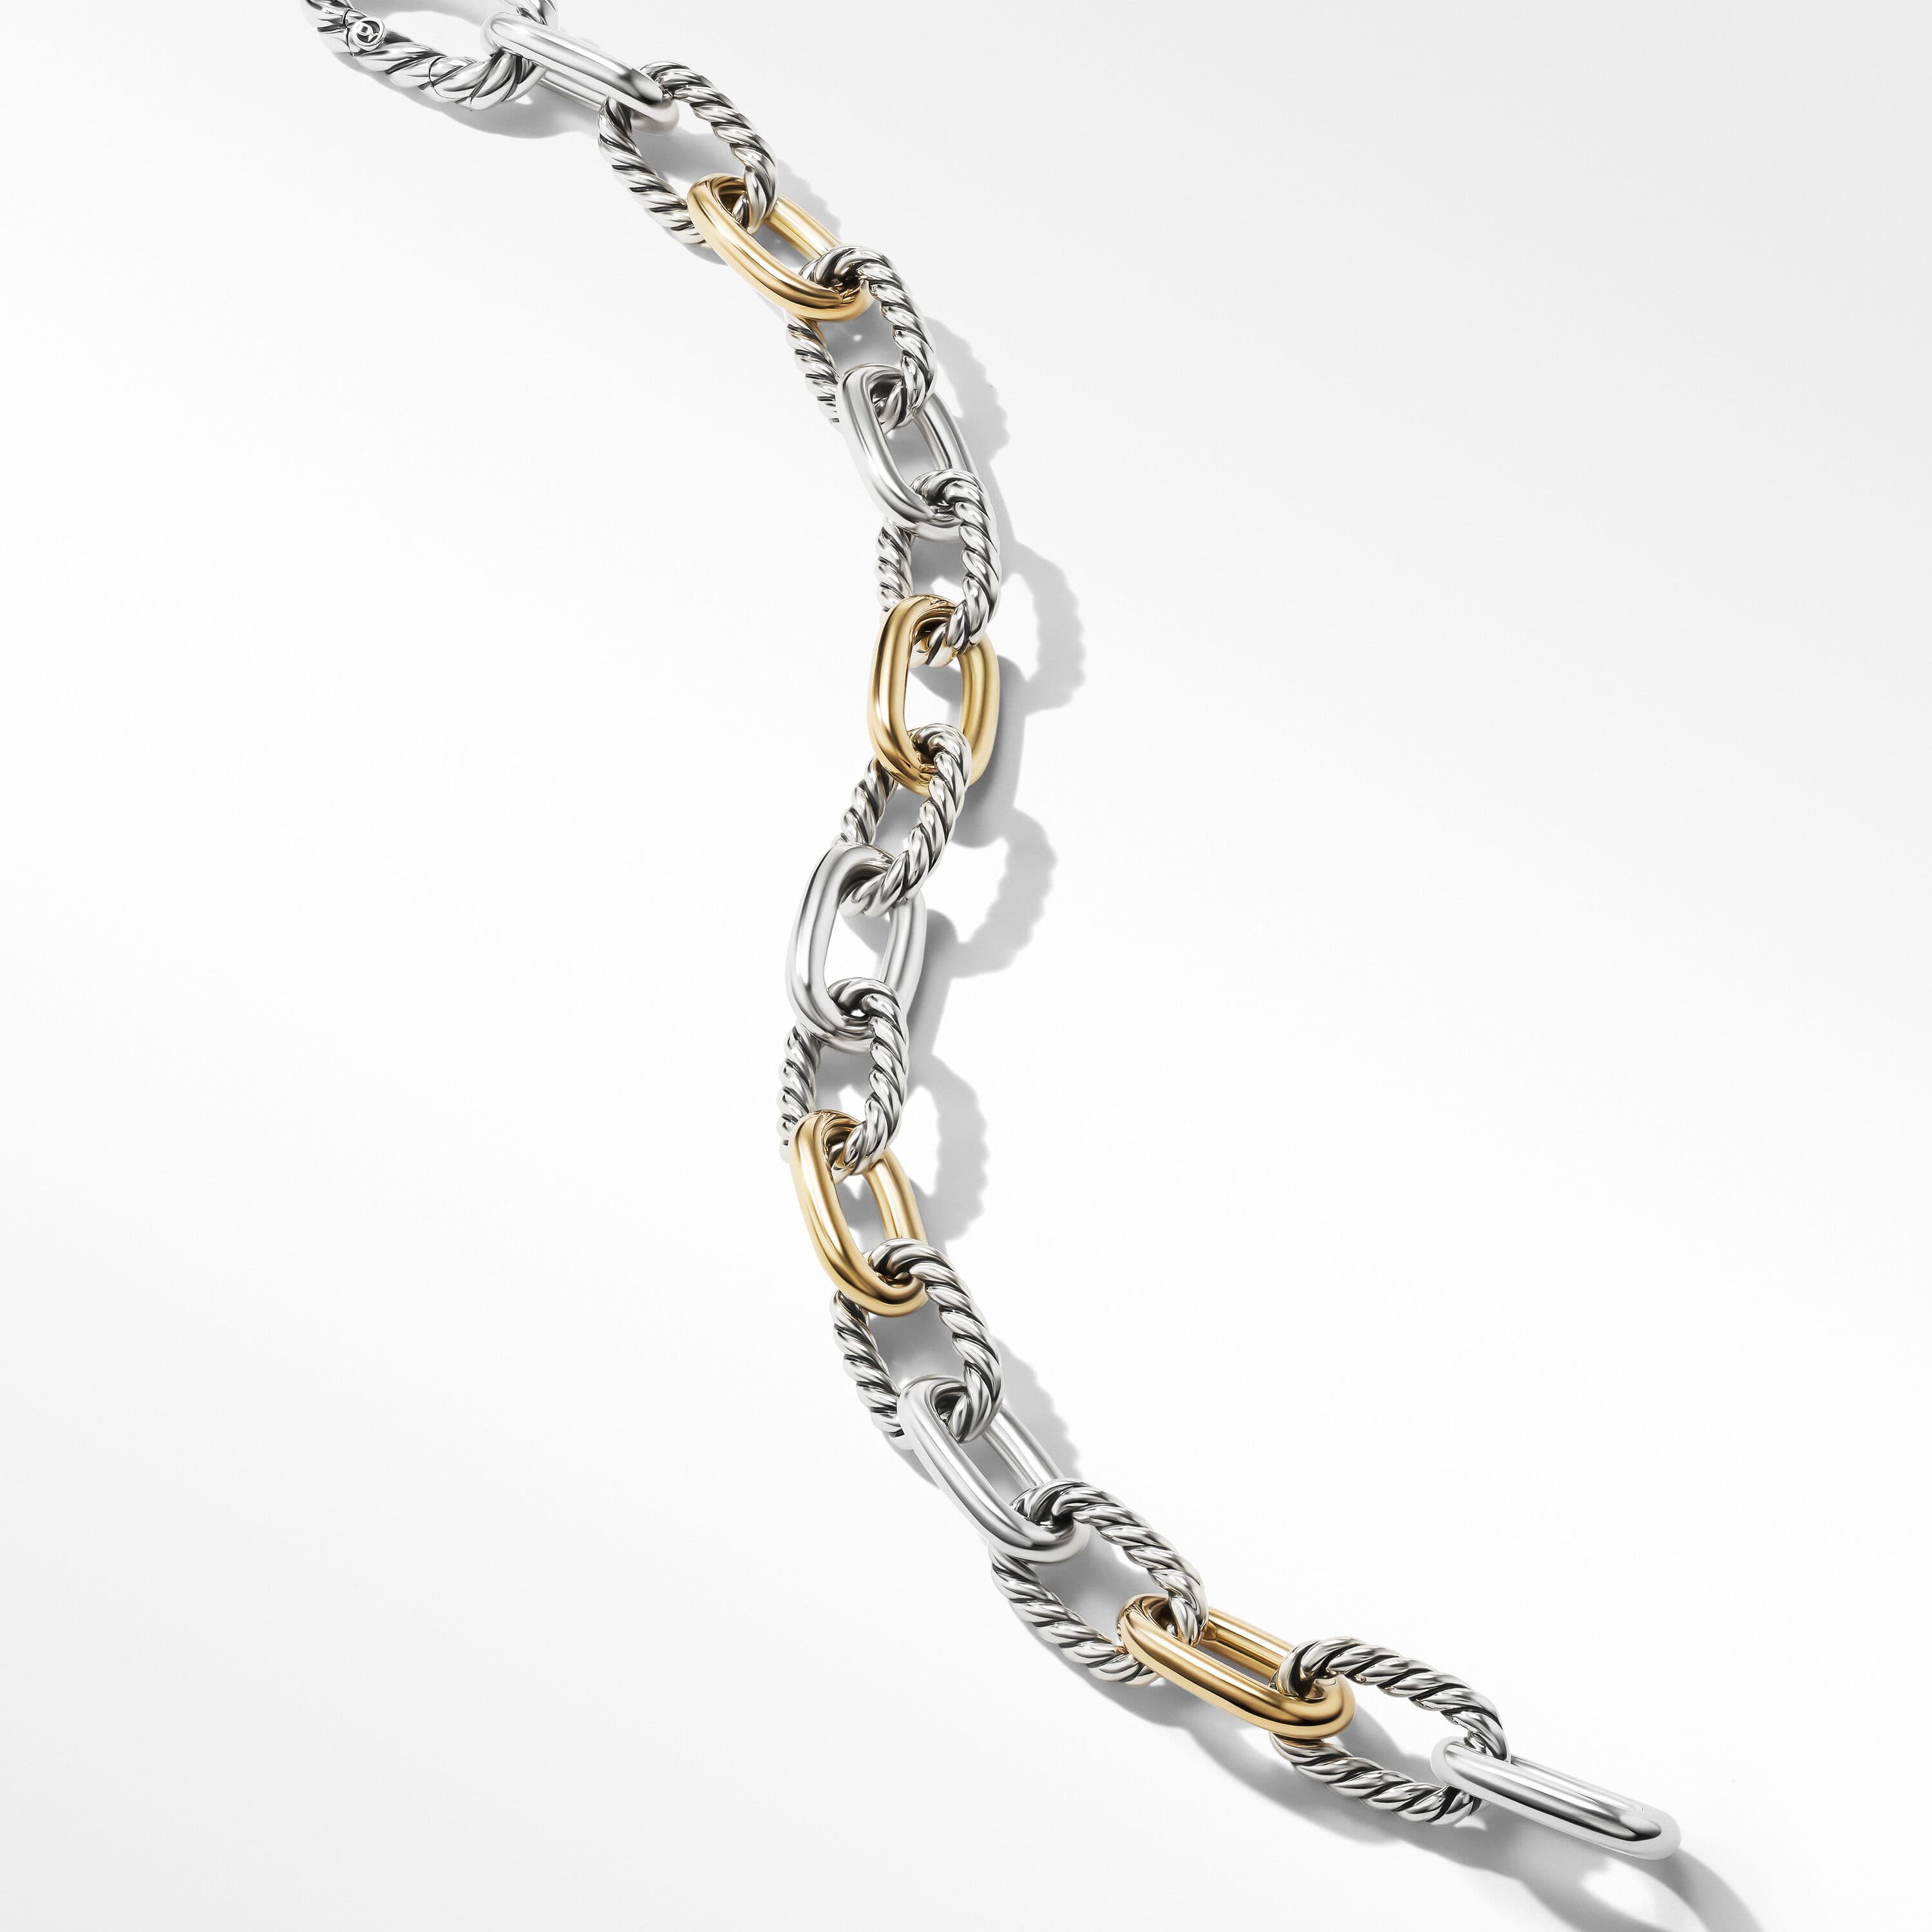 David Yurman DY Madison Chain 8.5mm Bracelet in Sterling Silver with 18k Yellow Gold, size large 2